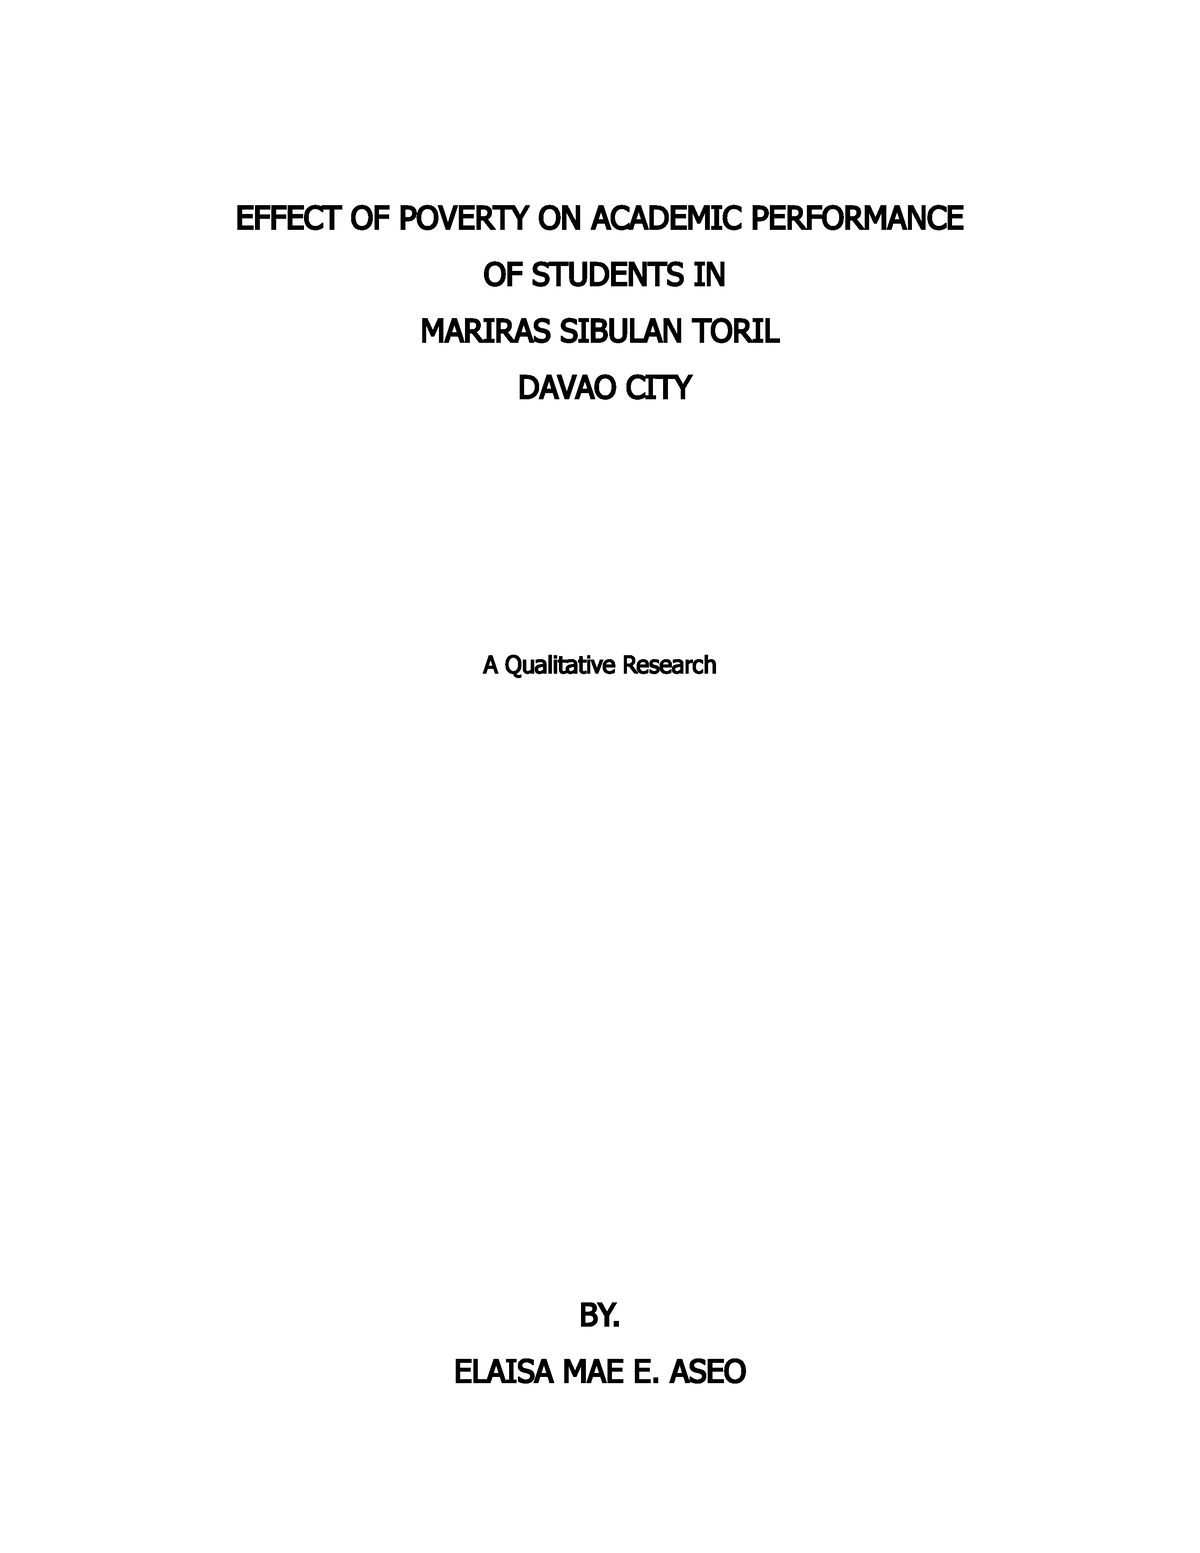 a research on the effect of poverty on academic performance